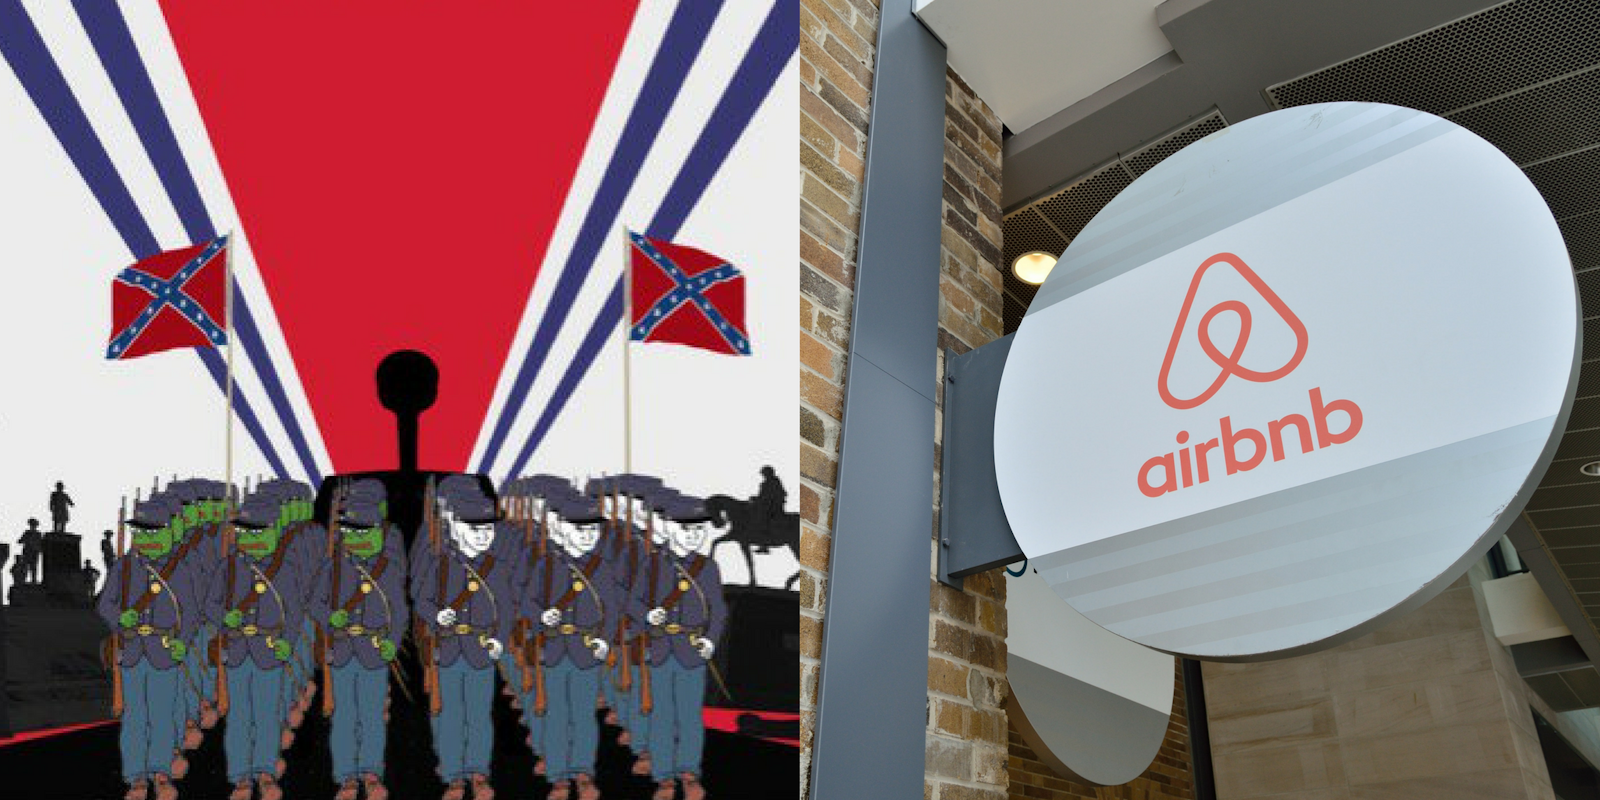 A flyer for an alt-right rally next to the logo for Airbnb